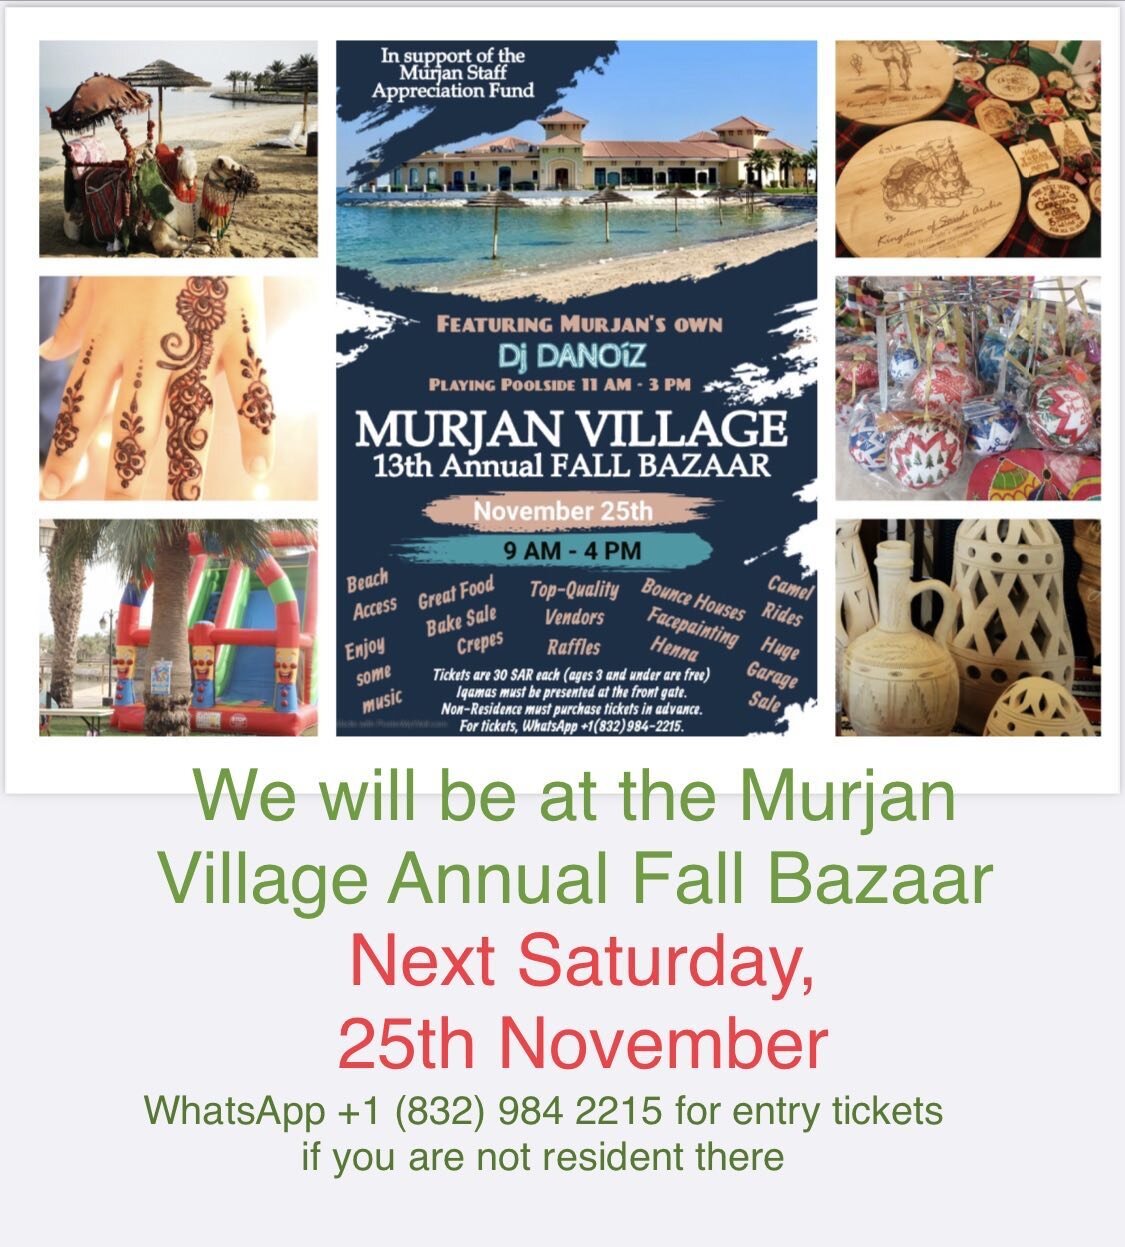 Arabian Collections will be up in Jubail next Saturday for the Murjan Village Bazaar. Come join us!